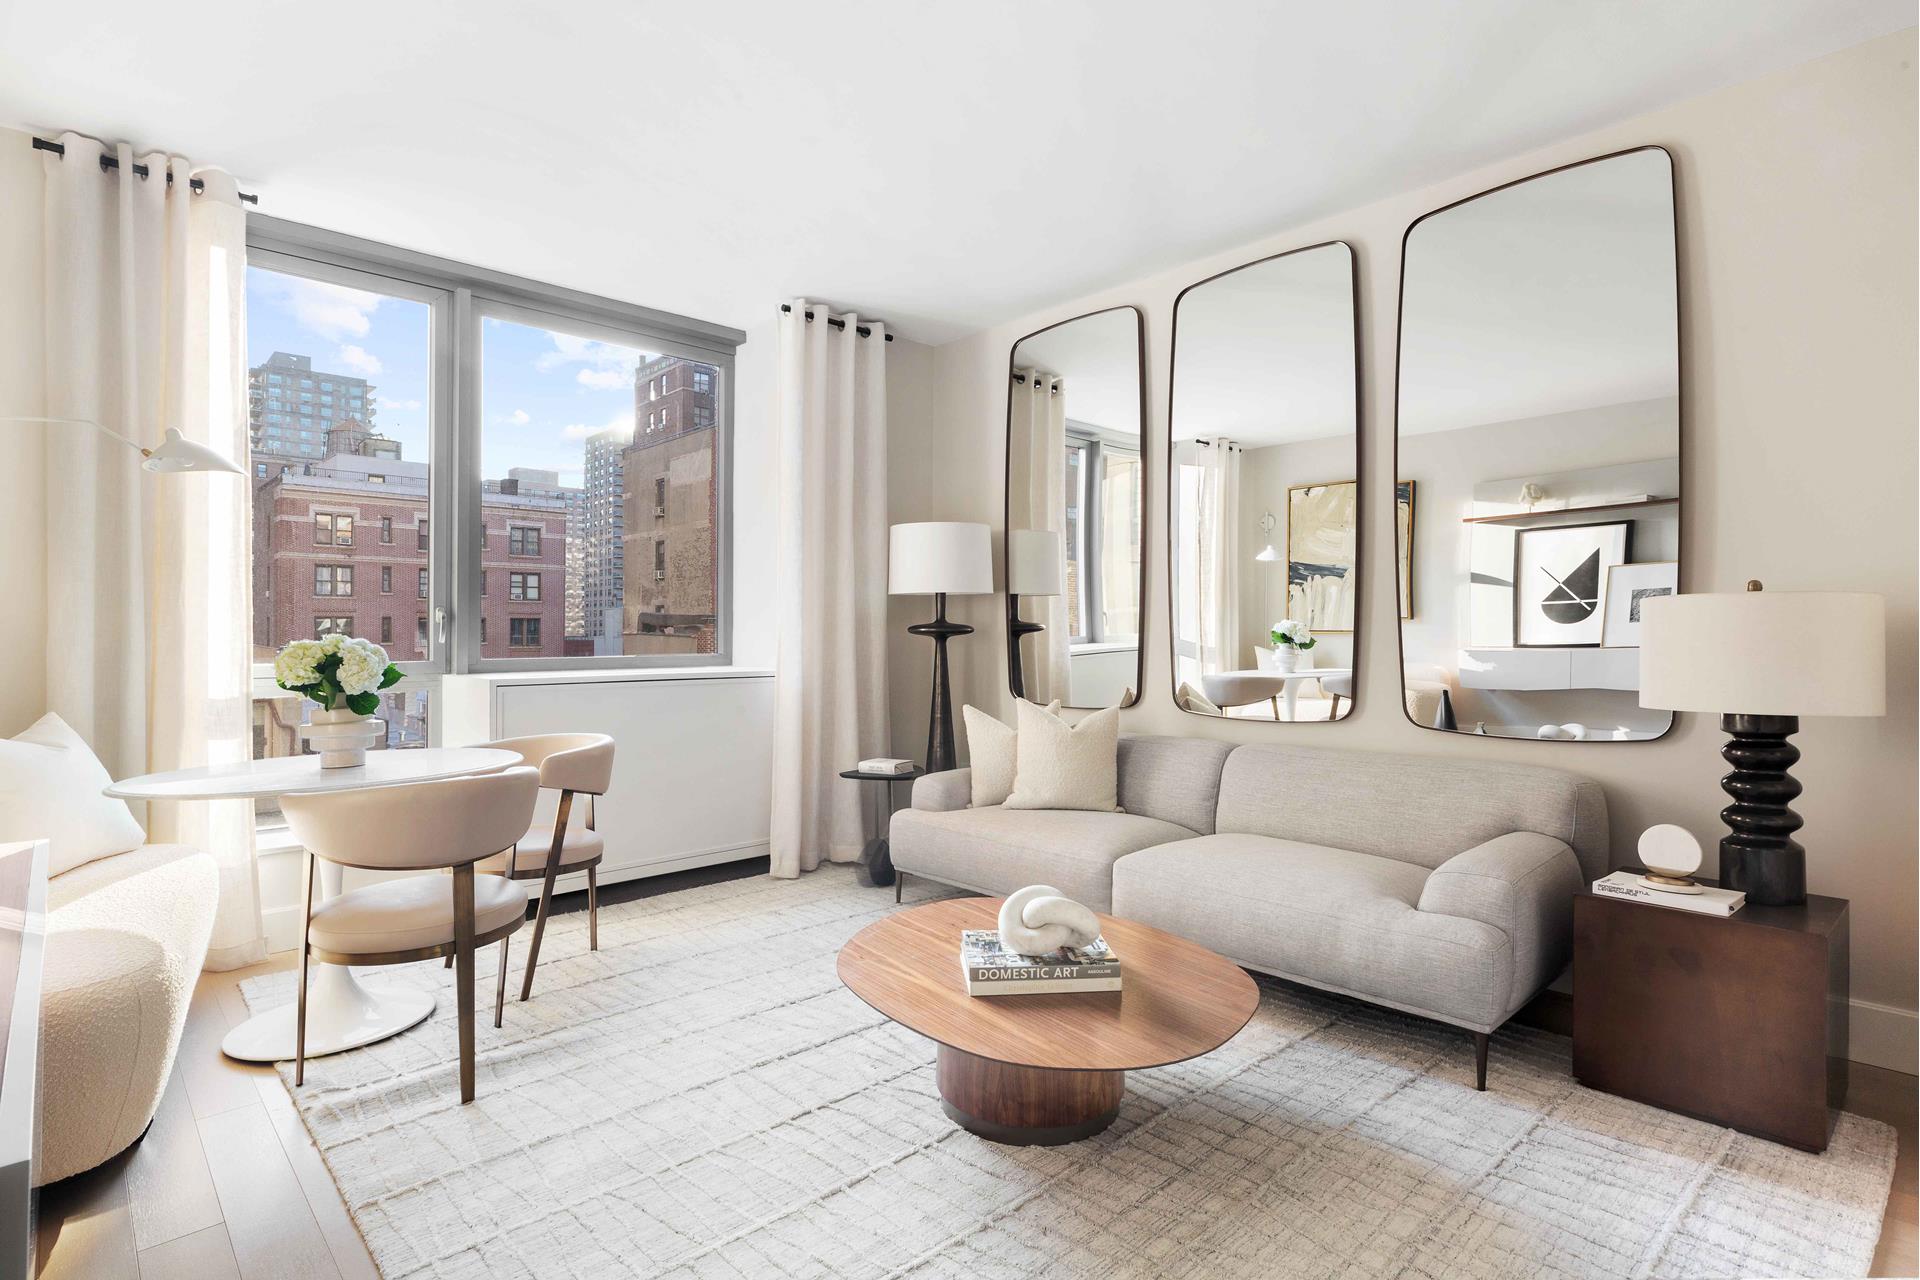 212 West 72nd Street 4A, Lincoln Sq, Upper West Side, NYC - 2 Bedrooms  
2 Bathrooms  
4 Rooms - 